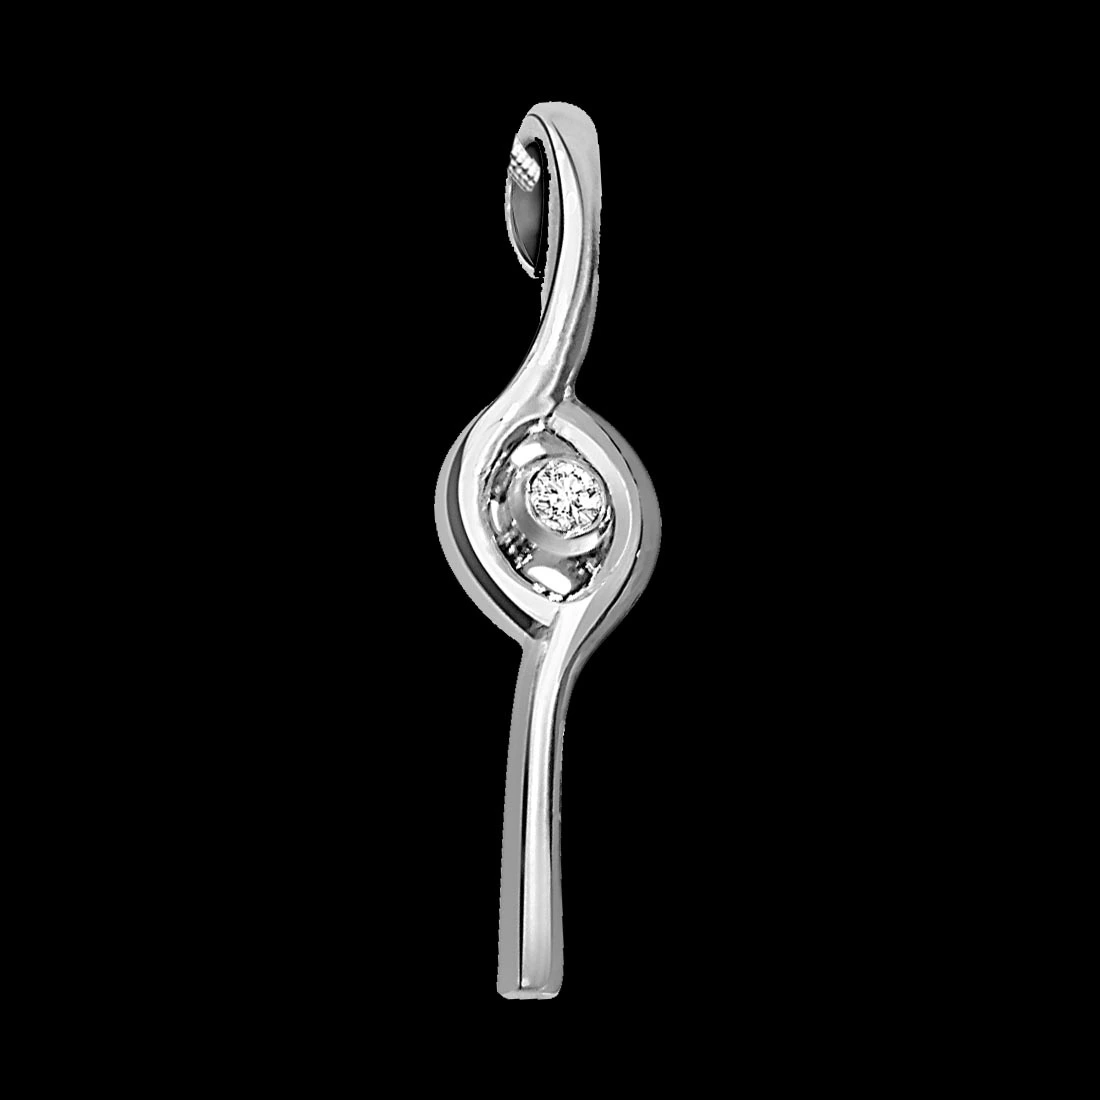 Cage of Fantasy - Real Diamond & Sterling Silver Pendant with 18 IN Chain (SDP45)